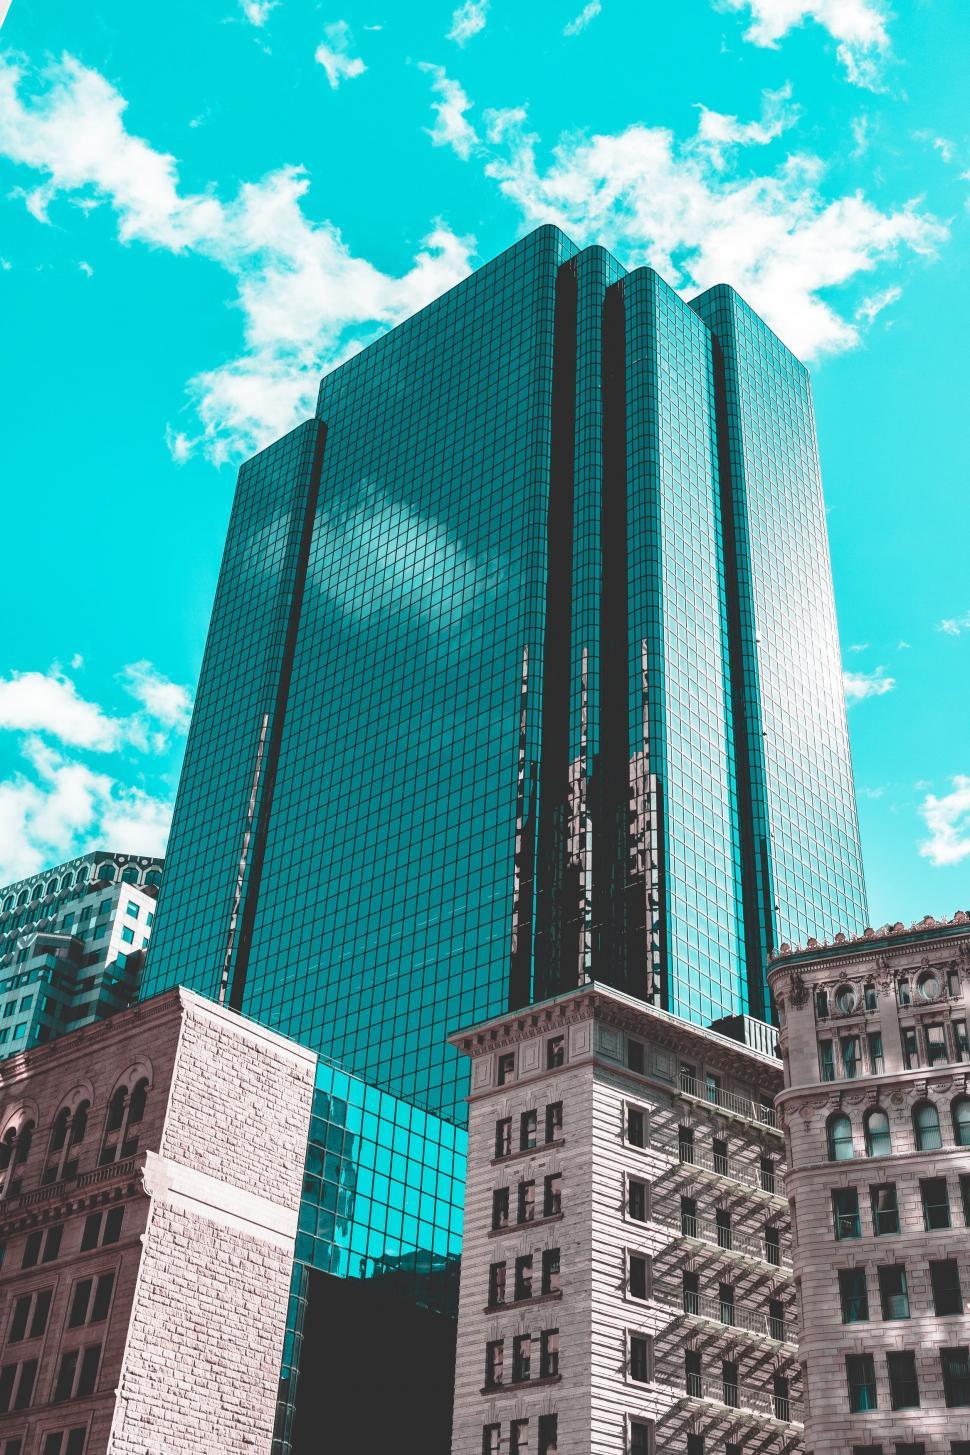 Free Image of Tall Building Amongst Others in Urban Setting 